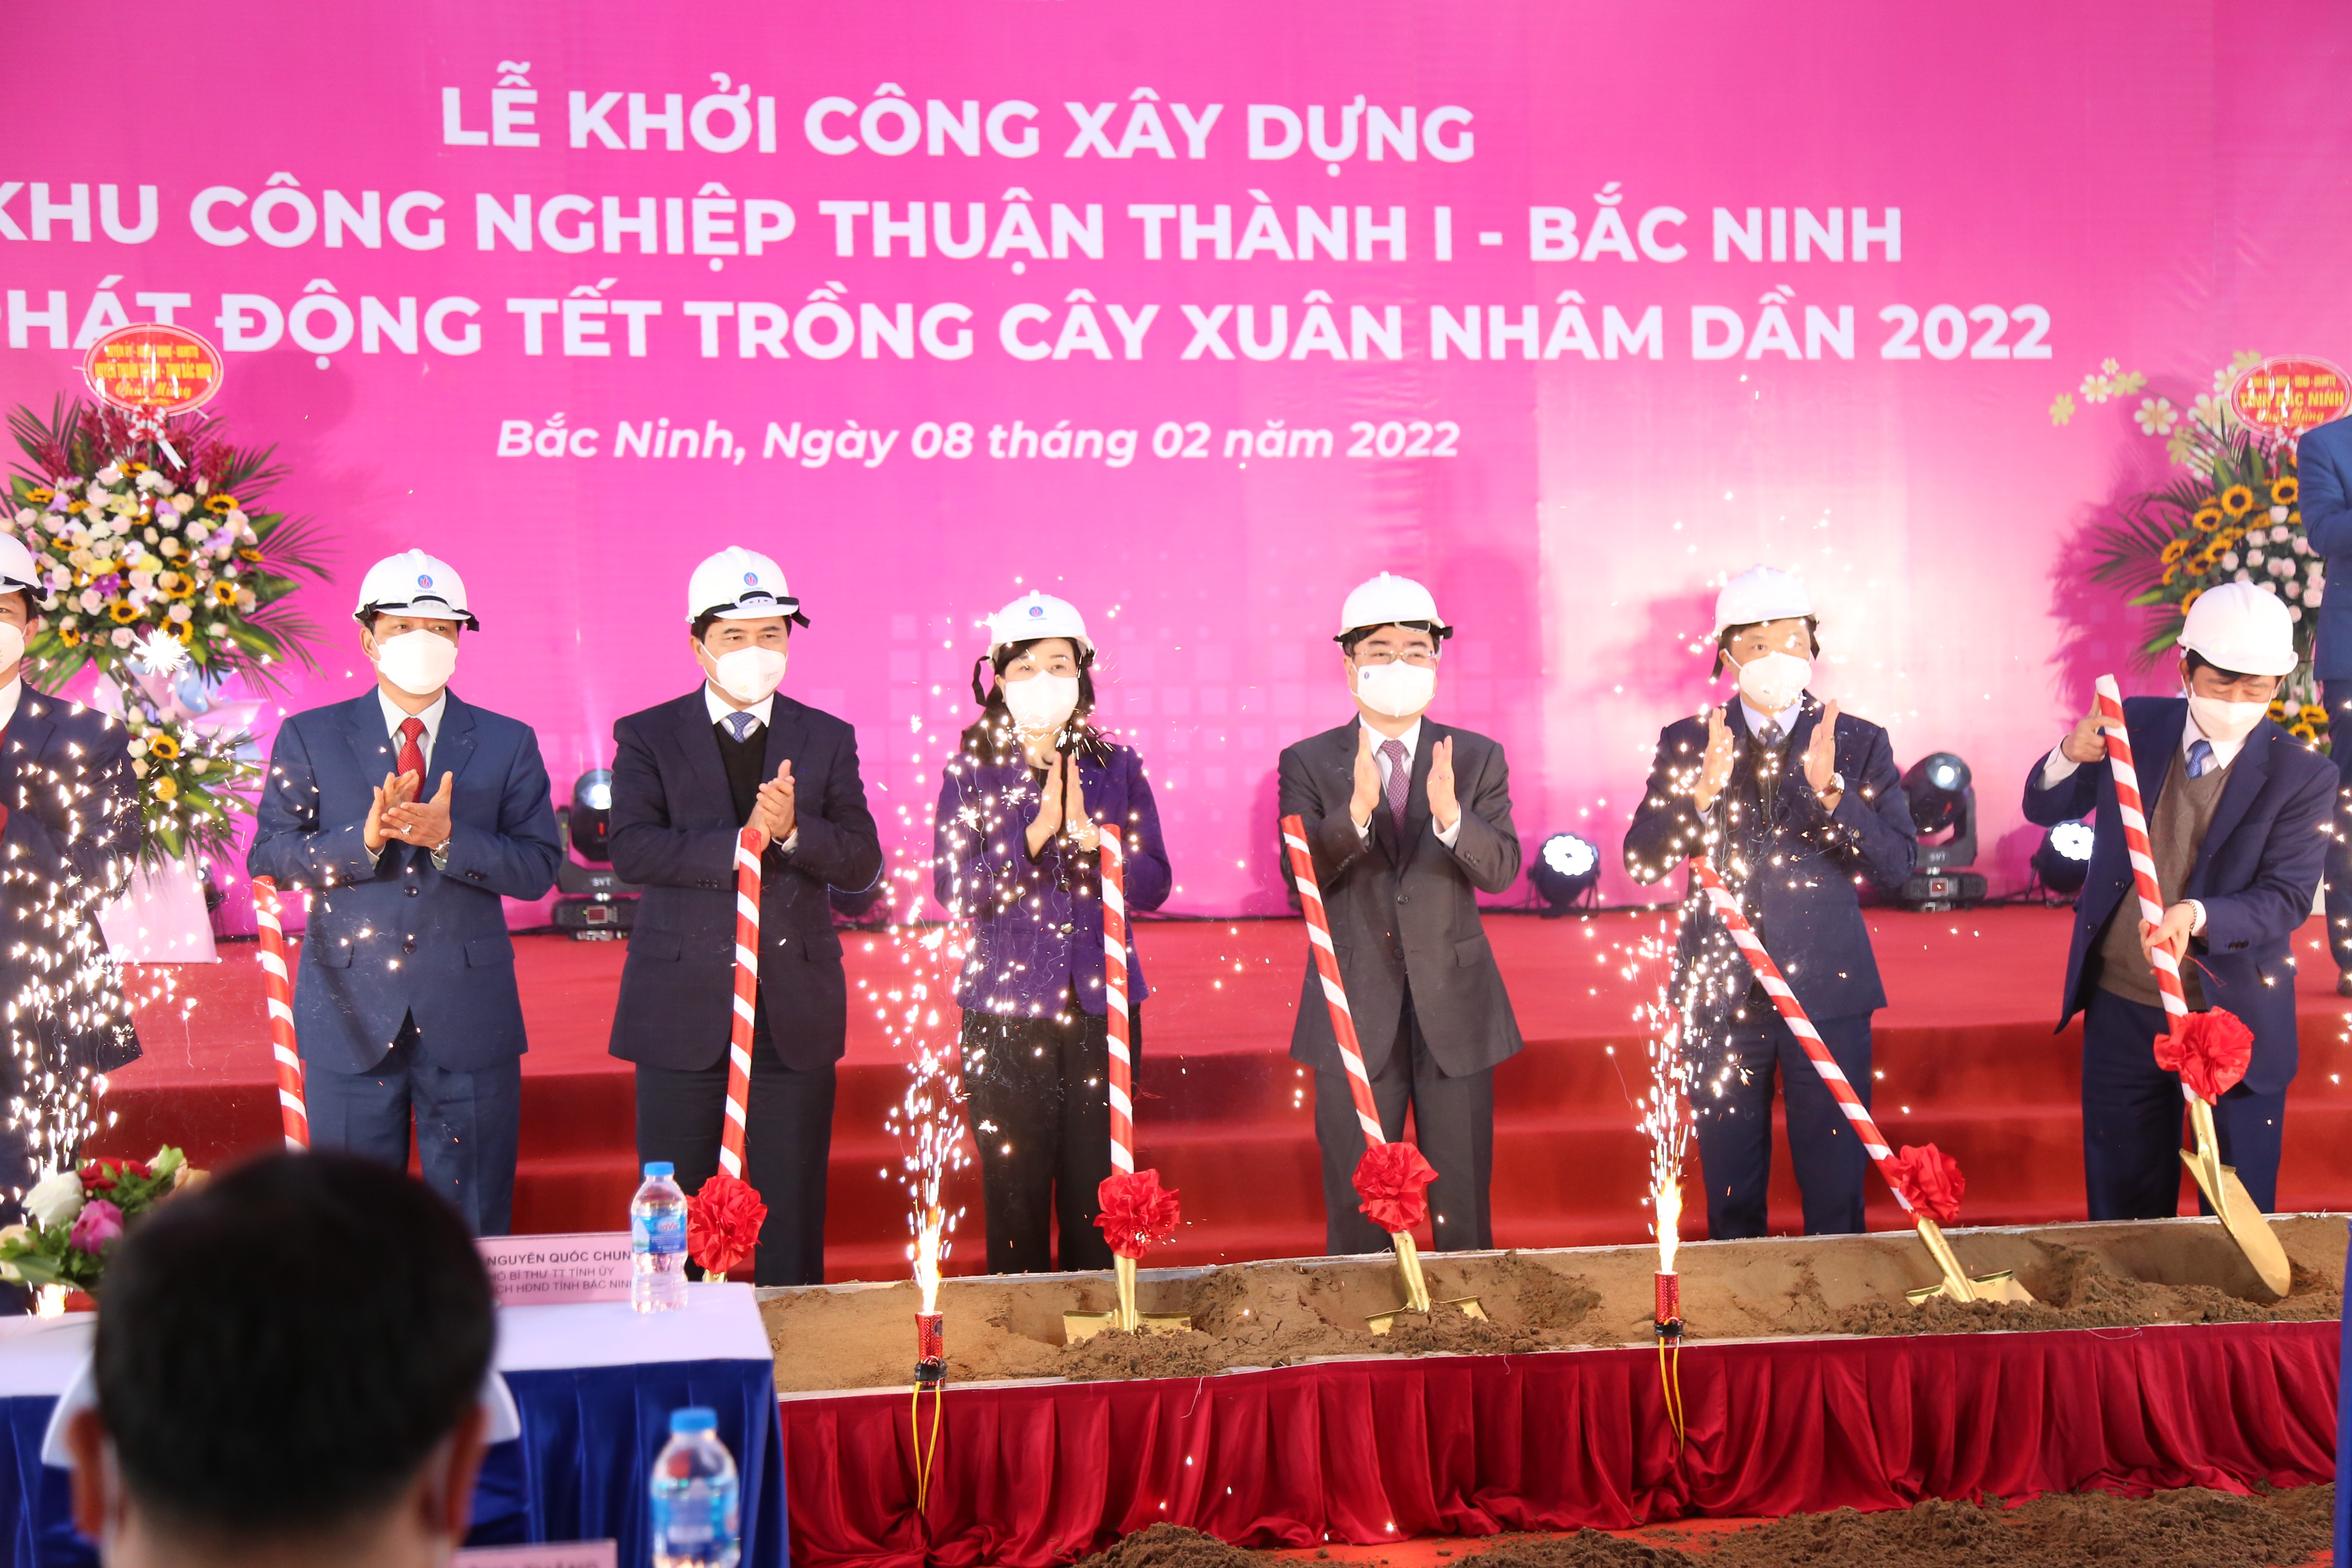 Viglacera Begin the spring round of pleasures, started the project of Thuan Thanh I Industrial Park and the project of housing for workers in Yen Phong Industrial Park, Bac Ninh province